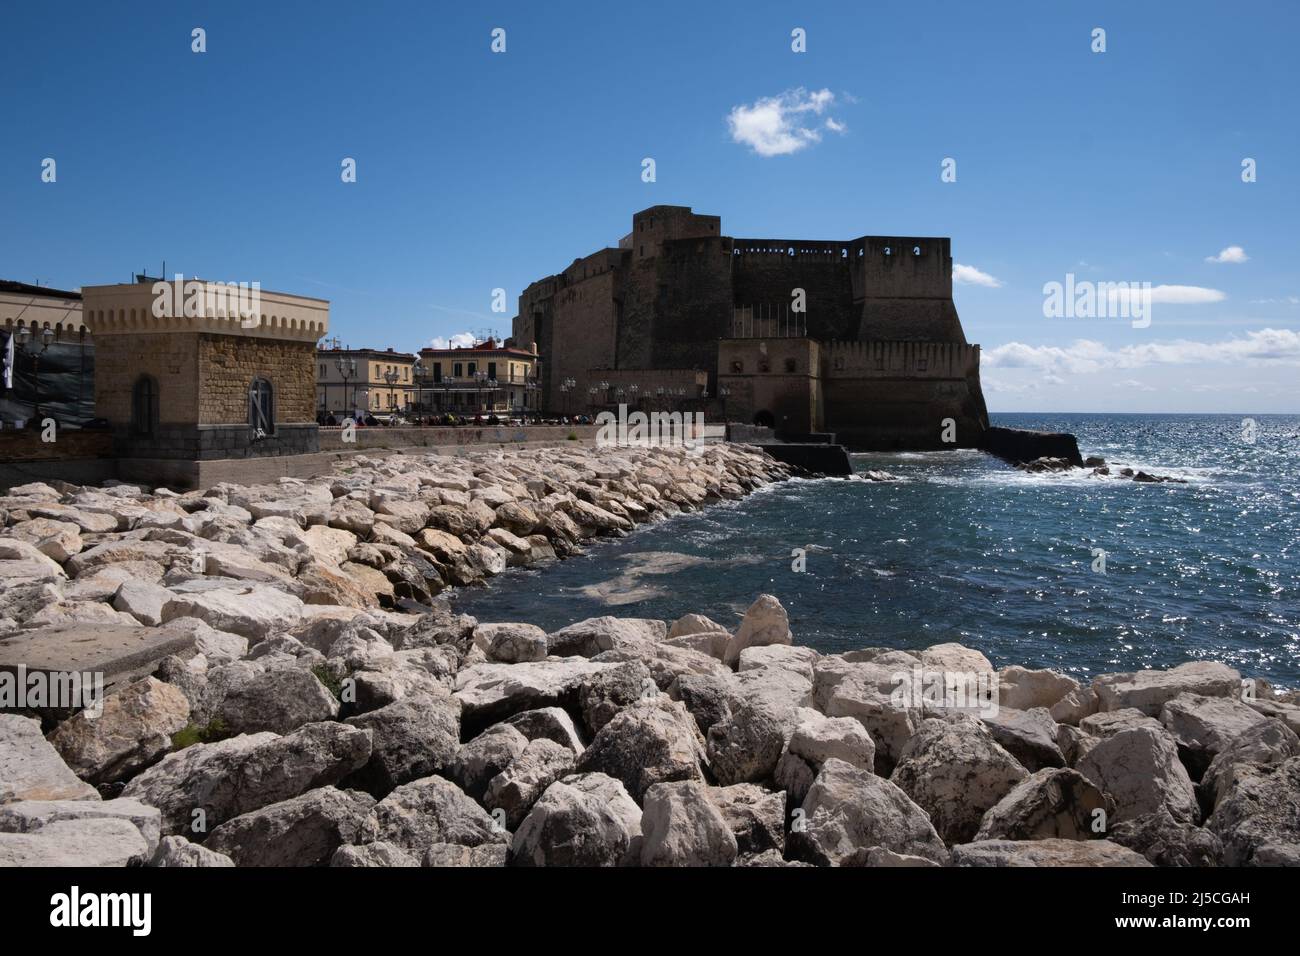 Old medieval castle in Naples, Italy Stock Photo